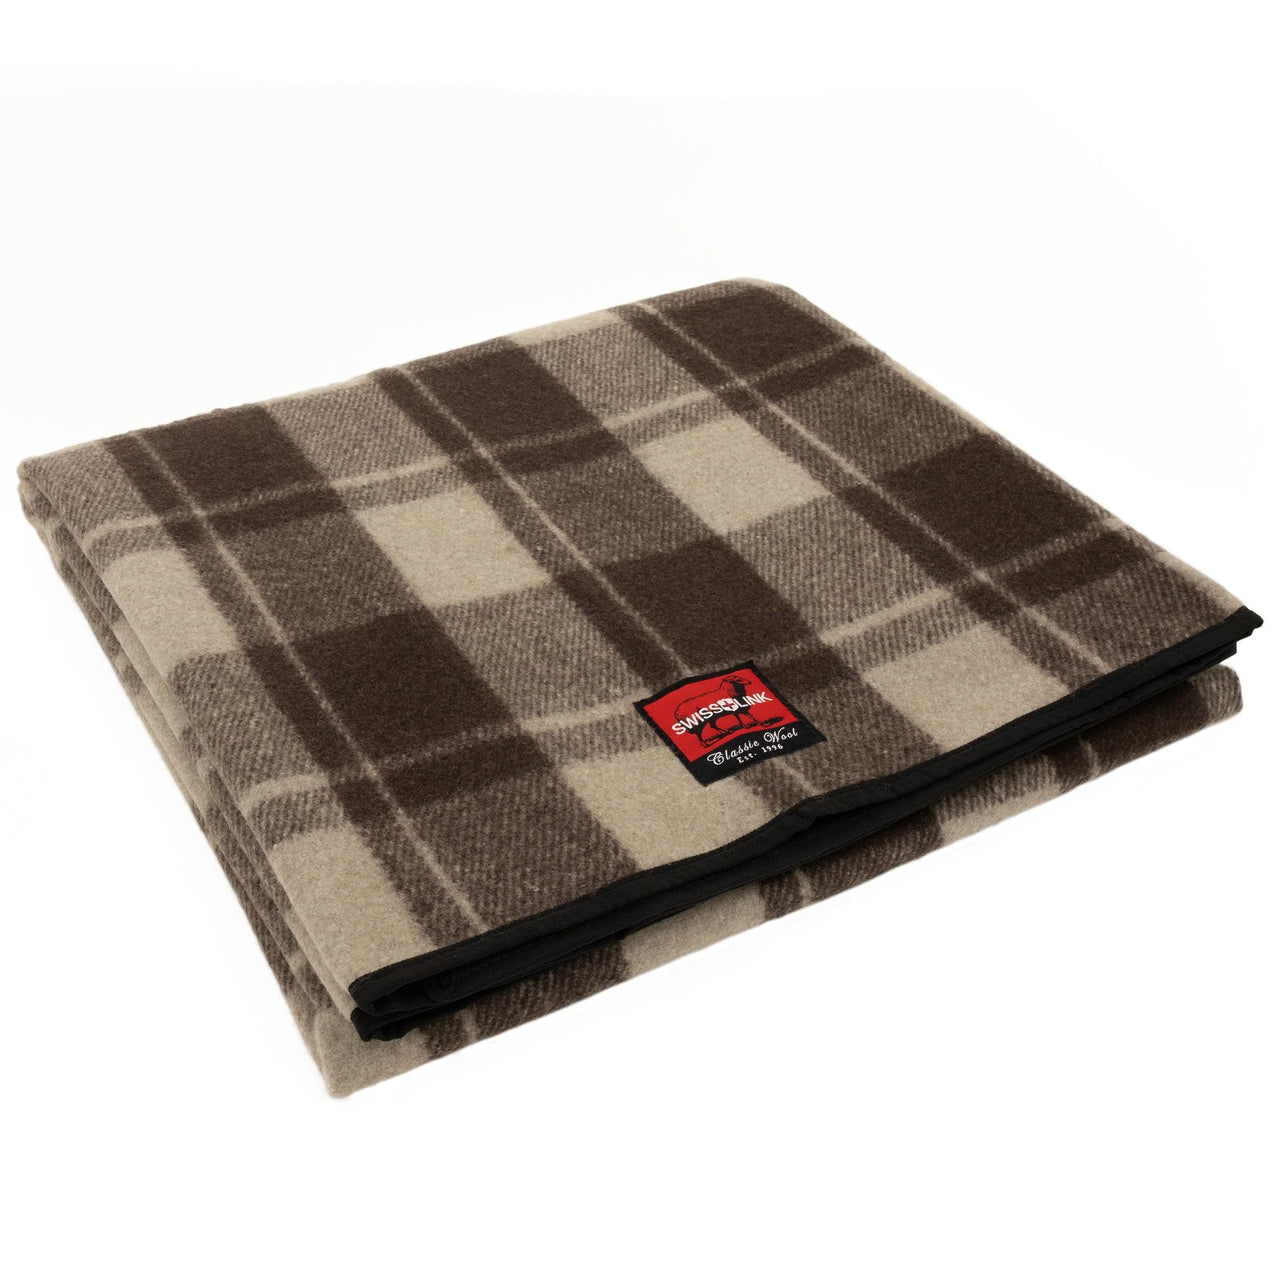 Assorted Classic Wool Picnic Blankets with Waterproof Backing 68" x 55"